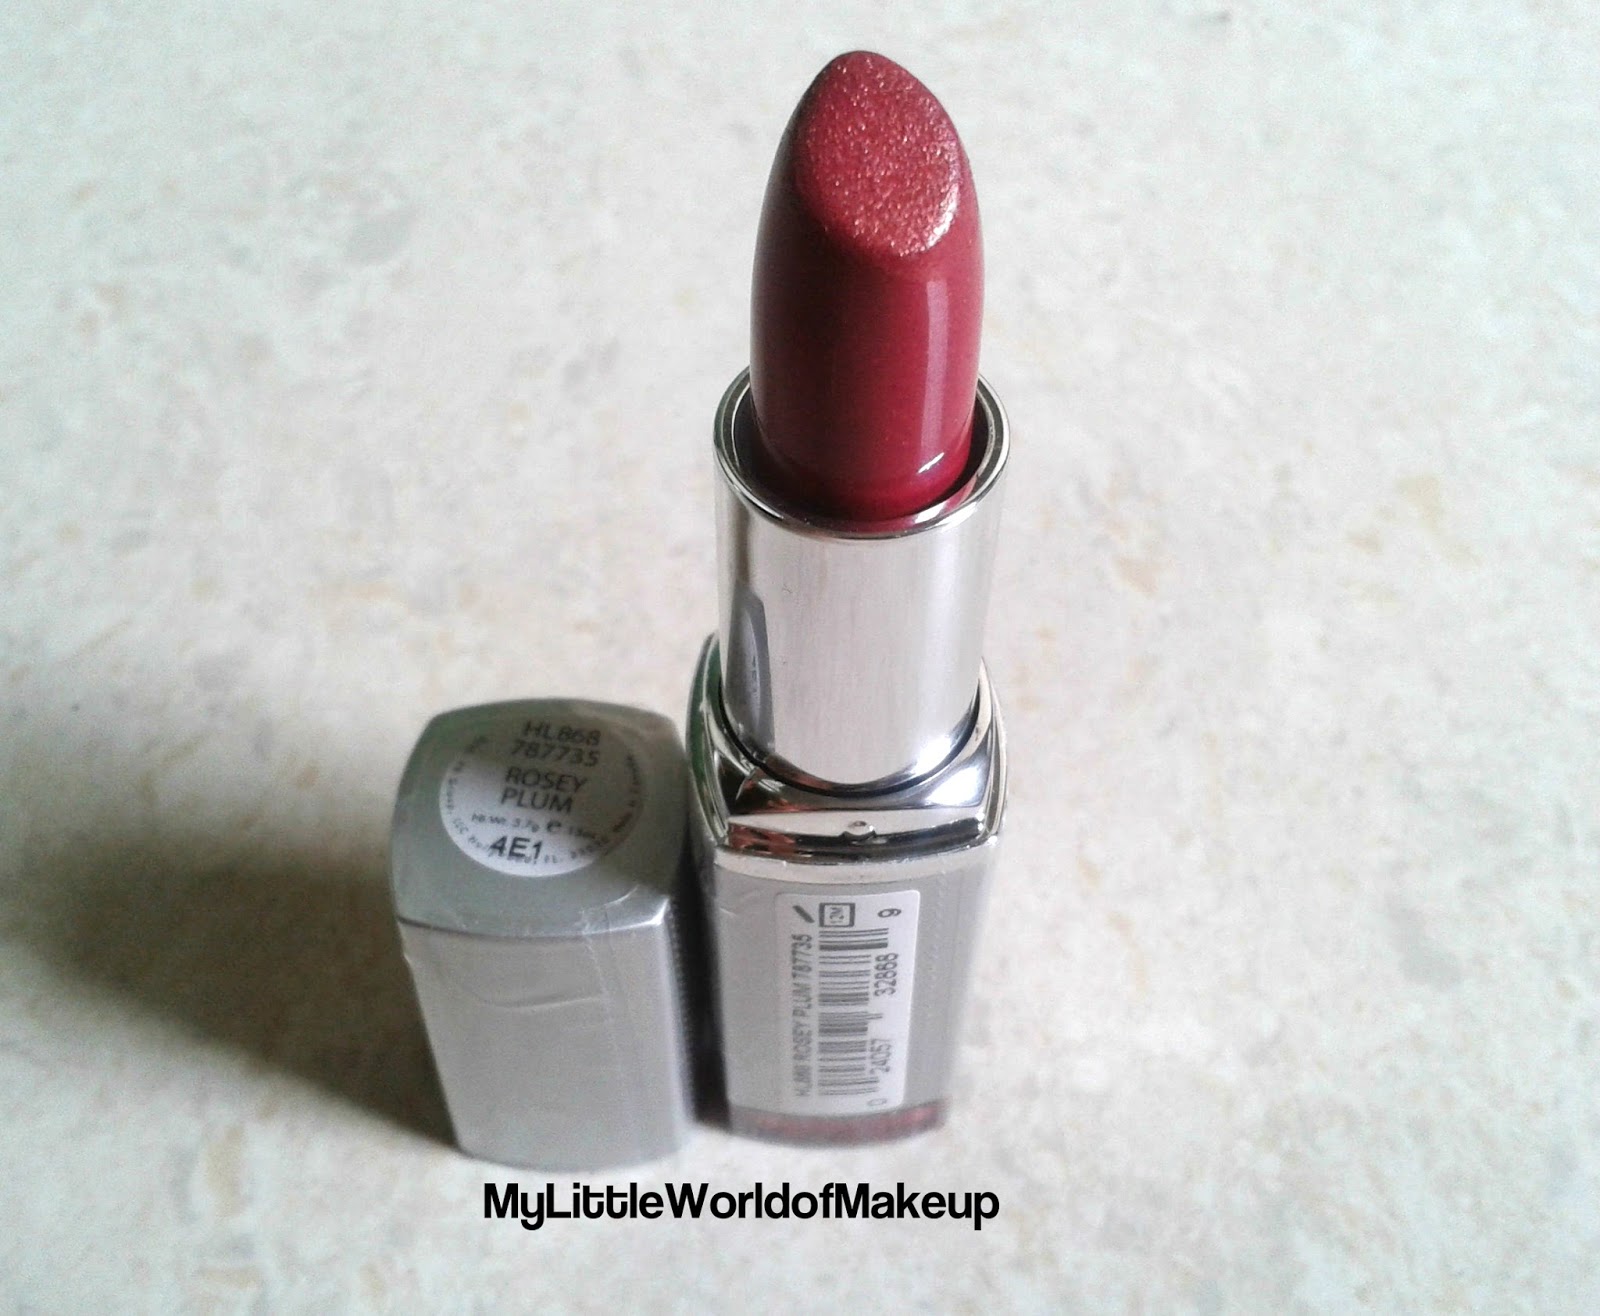 Xxx Sex Girl Hot Small 3gp - Palladio Herbal Lipstick in Rosey Plum Review & Swatches